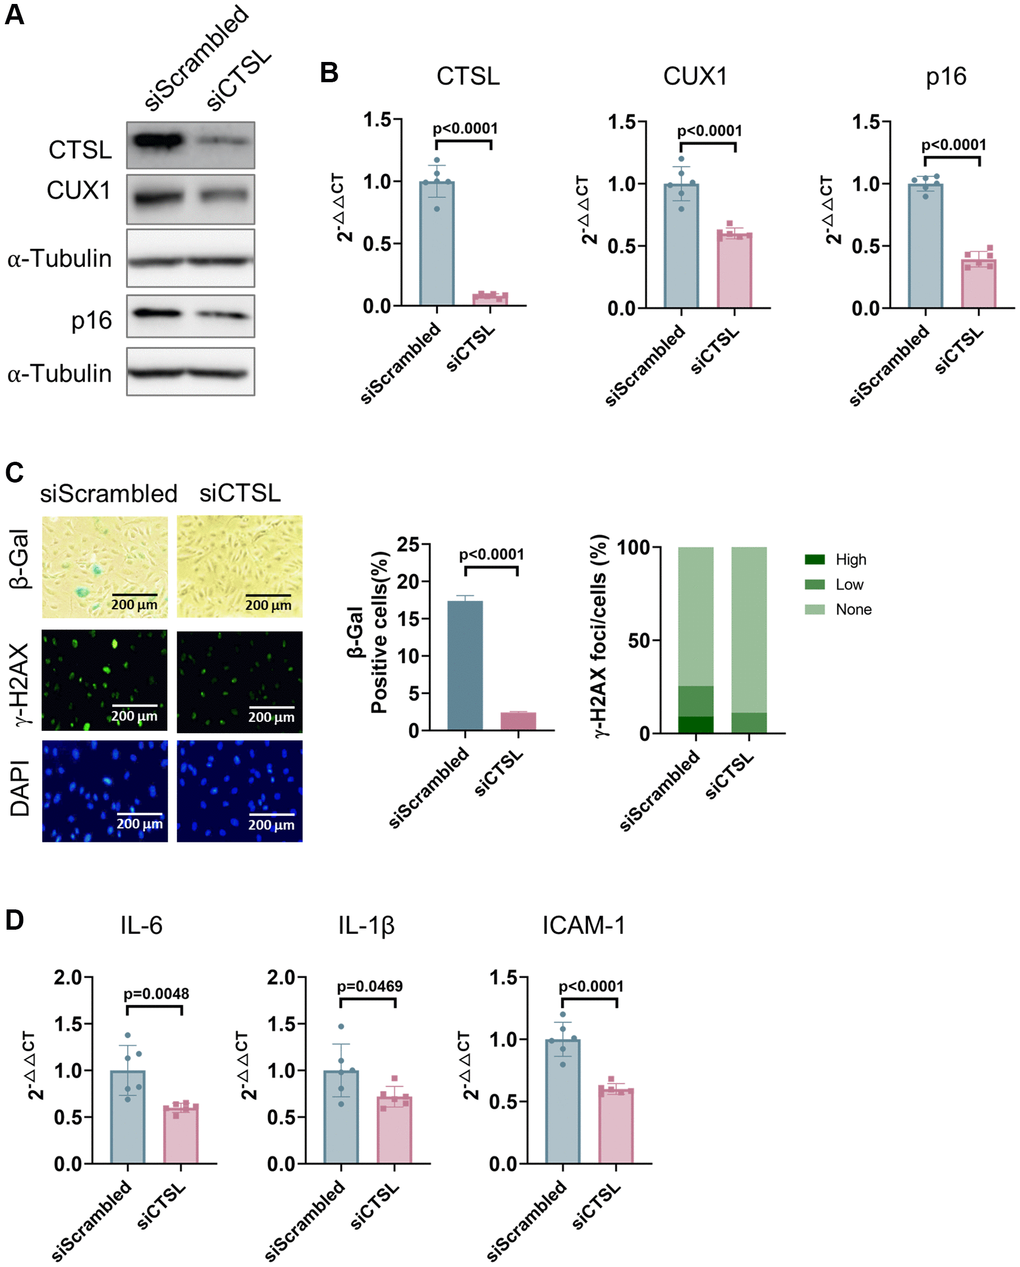 Downregulation of CTSL decreases the expression of CUX1 and p16INK4a, and inhibits cellular senescence in human ECs. (A, B) Western blot and qPCR analyses showing that siRNA-mediated CTSL knockdown (siCTSL) downregulates CUX1 and p16INK4a expression in human ECs. (C, D) siRNA-mediated CTSL knockdown (siCTSL) suppresses cellular senescence in human ECs as evidenced by SA-β-gal and γ-H2AX staining as well as by the expression of the SASP genes IL6, IL-1β, and ICAM-1. Quantitative plots for both β-gal+ cells (%) in SA-β-gal staining and γ-H2AX foci/cells (%) with γ-H2AX staining were shown on the right side of the panel C. DAPI staining visualizes the presence of nuclei as a control for the cells in this analysis. Data for Western blots represent three biologically independent samples (n = 3). Data for qPCR represent a combination of three (n = 3) biologically independent experiments. Data for both SA-β-gal staining and γ-H2AX staining represent three biologically independent samples (n = 3).